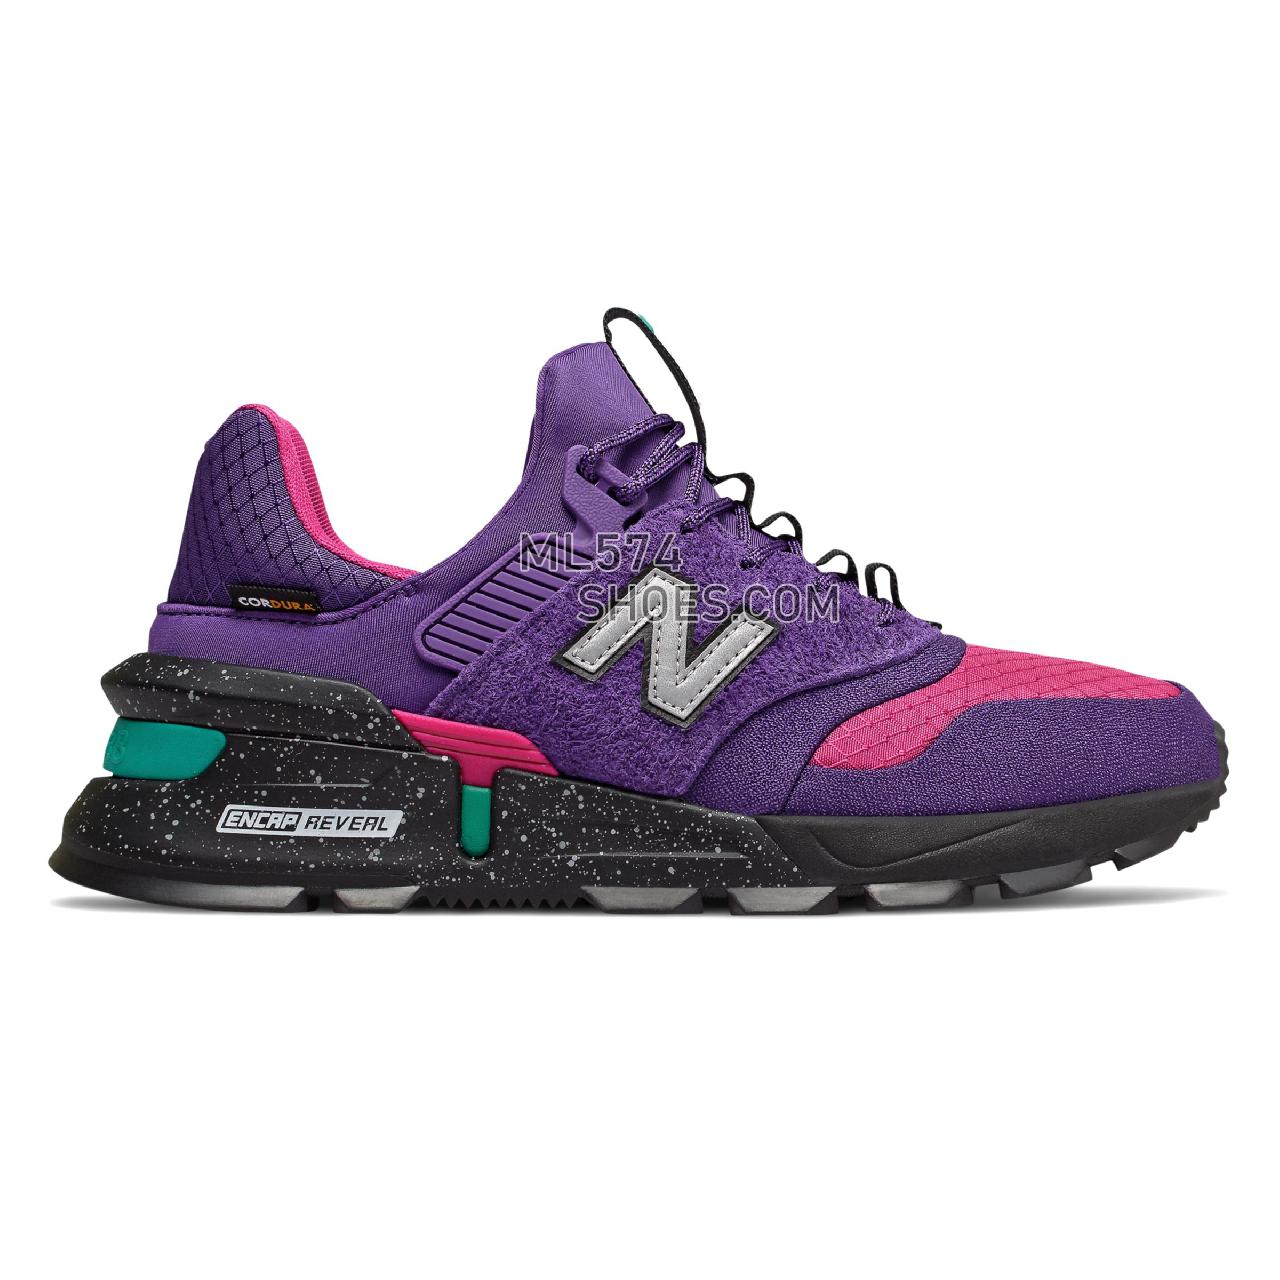 New Balance 997 Sport - Men's 997 Sport Classic MS997SV1-31662-M - Prism Purple with Carnival - MS997SA